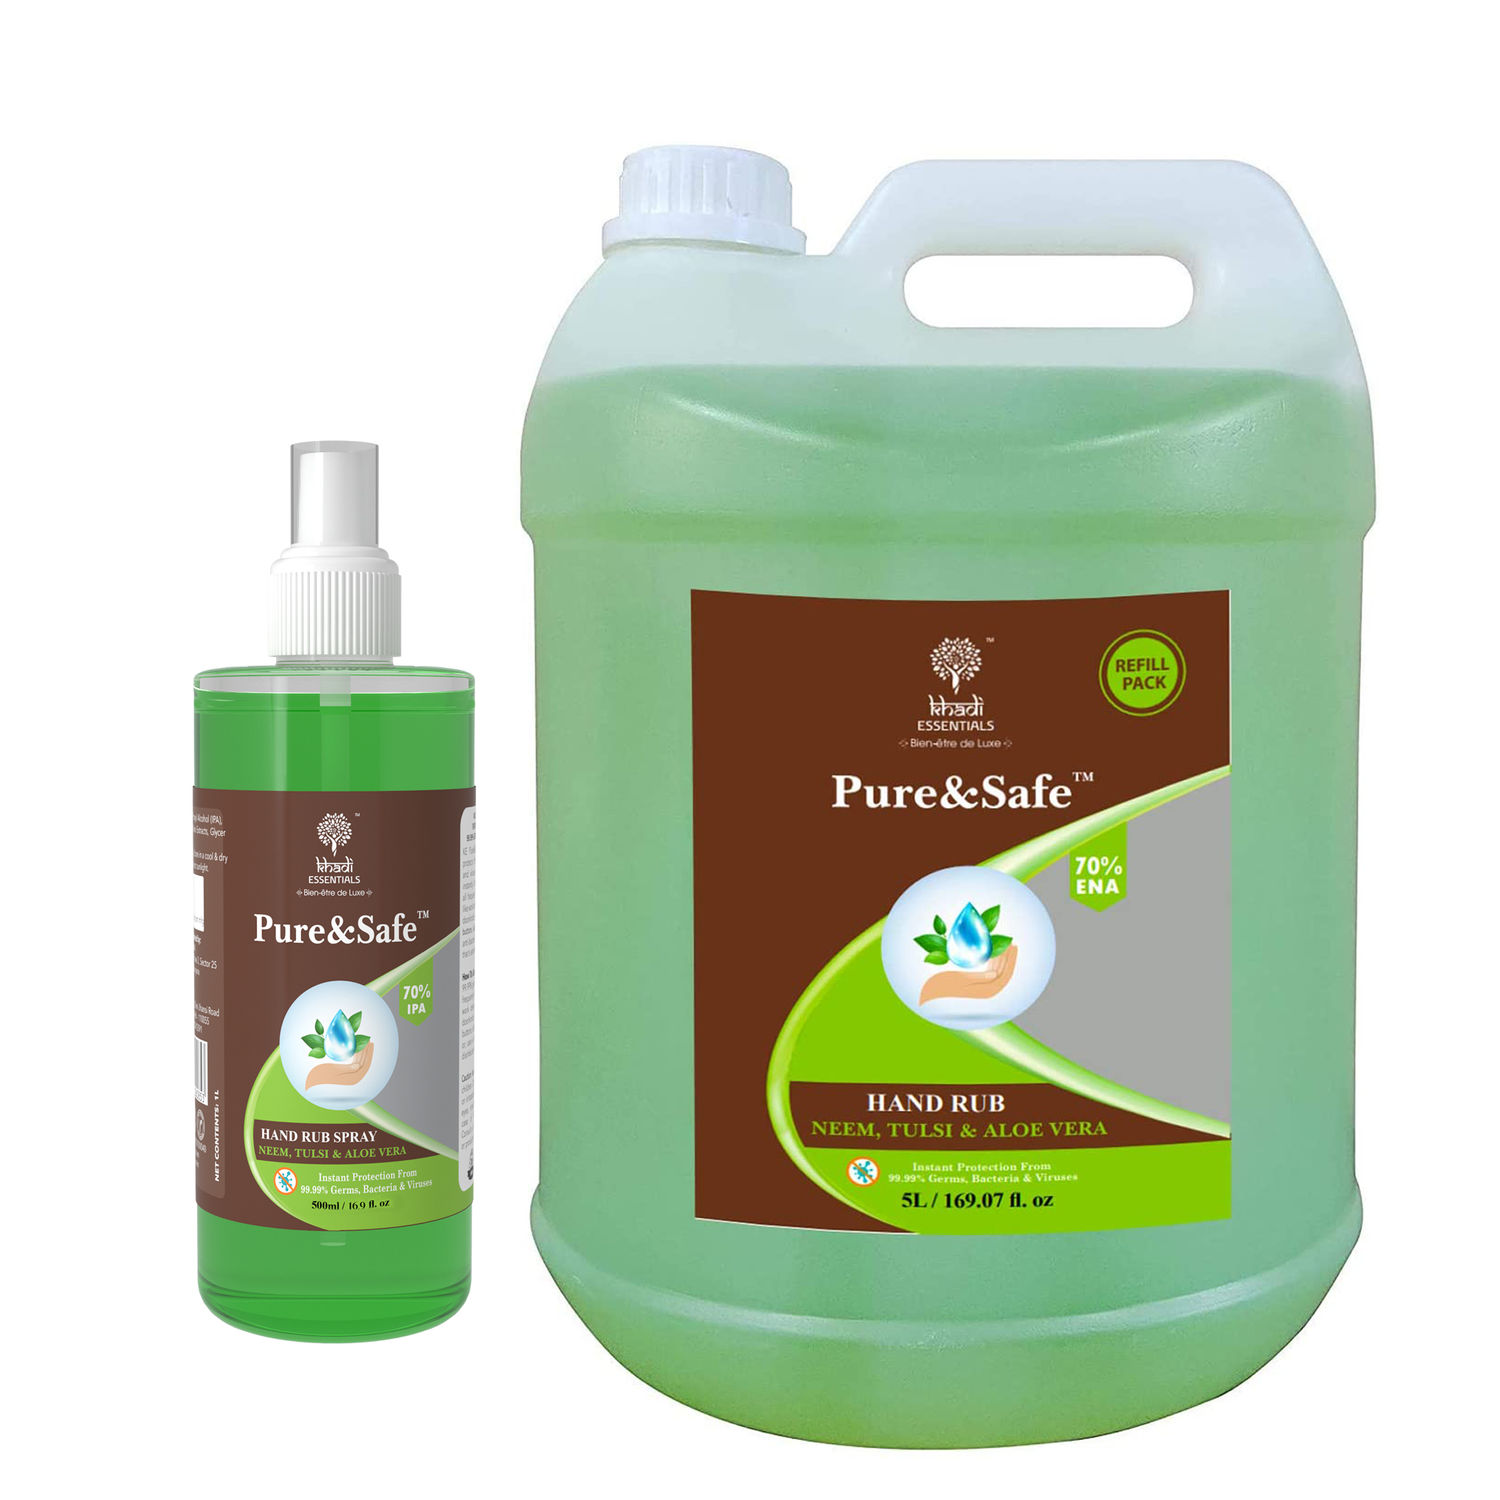 Khadi Essentials Pure&Safe Sanitizer 5 Liter Combo Instant Hand Sanitizer  Liquid Spray with Refill Pack 70% Ethyl Alcohol, Neem, Tulsi & Aloe Vera  Extracts with Glycerine (5ltr Bottle + 500mL Spray)